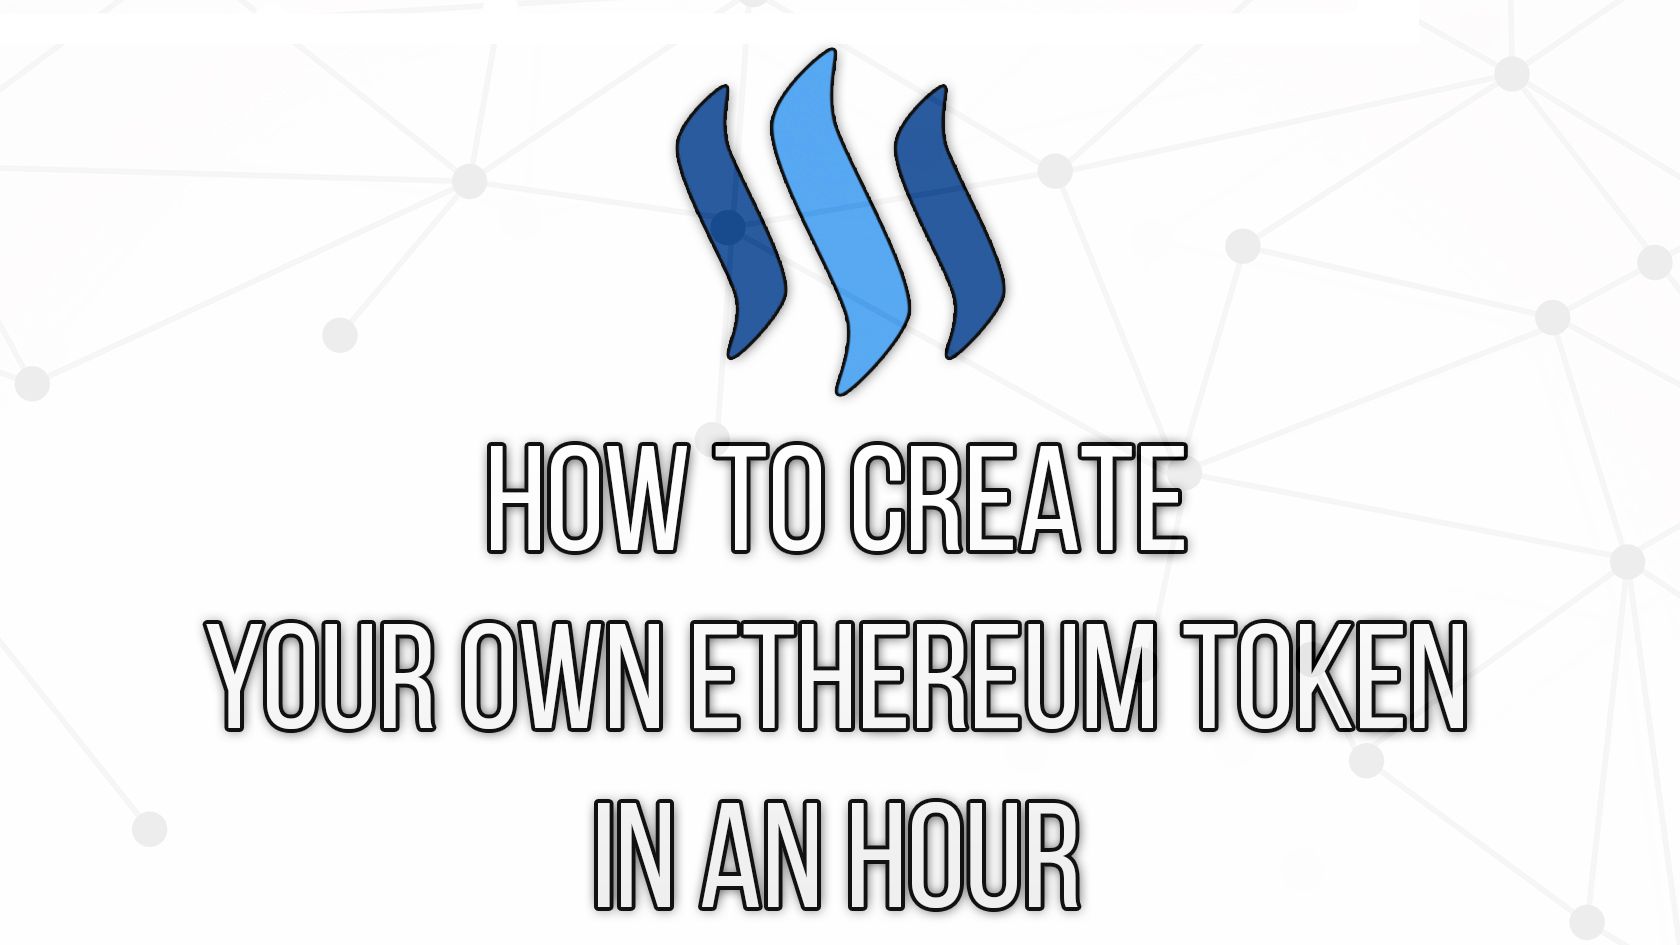 how to create coin on ethereum